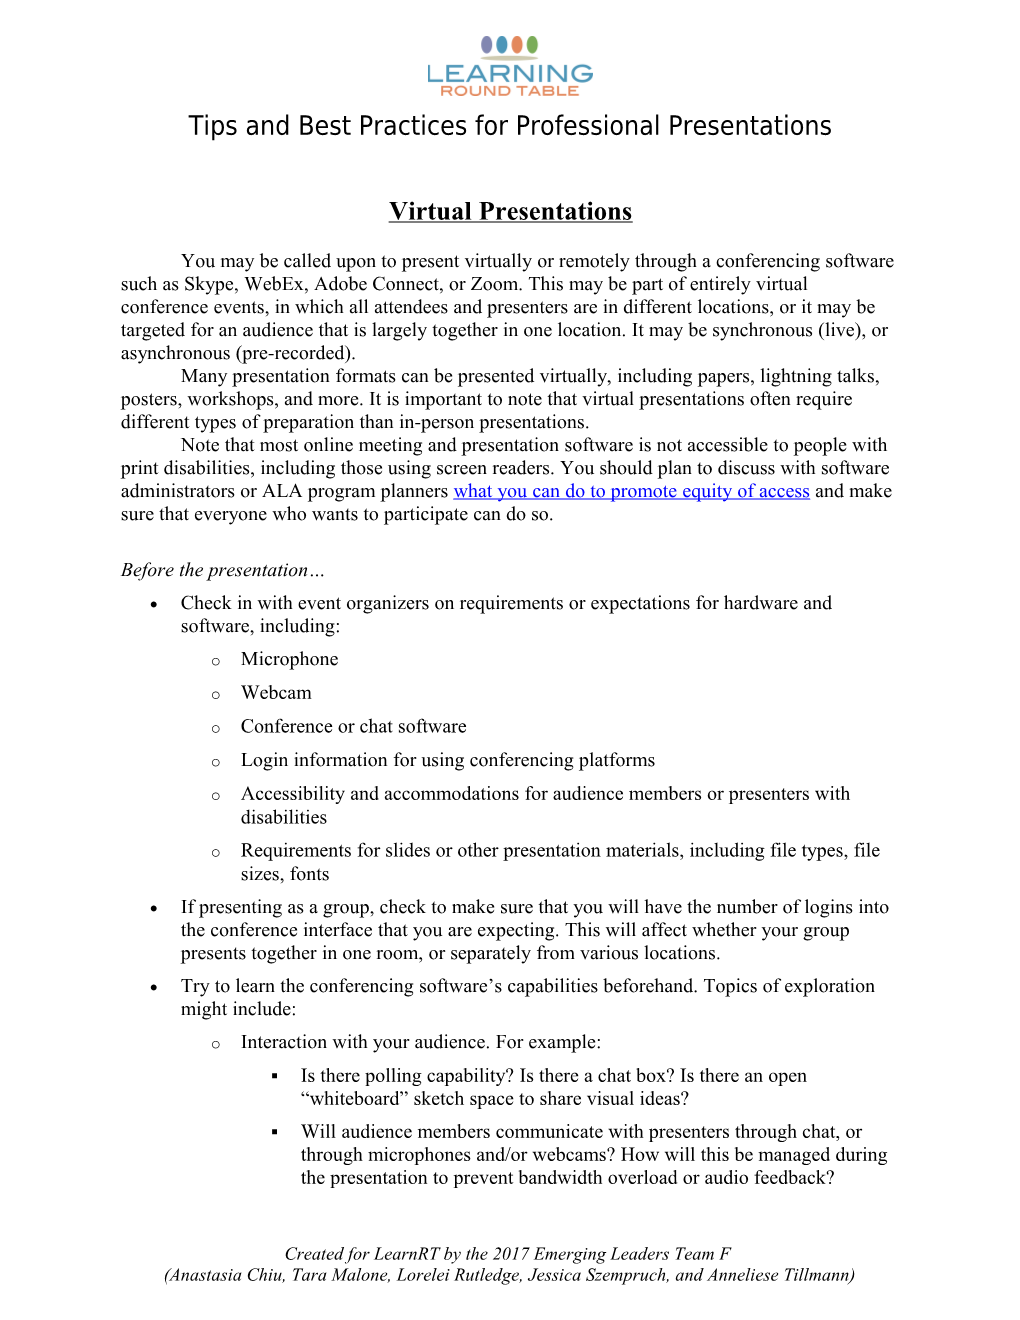 Tips and Best Practices for Professional Presentations